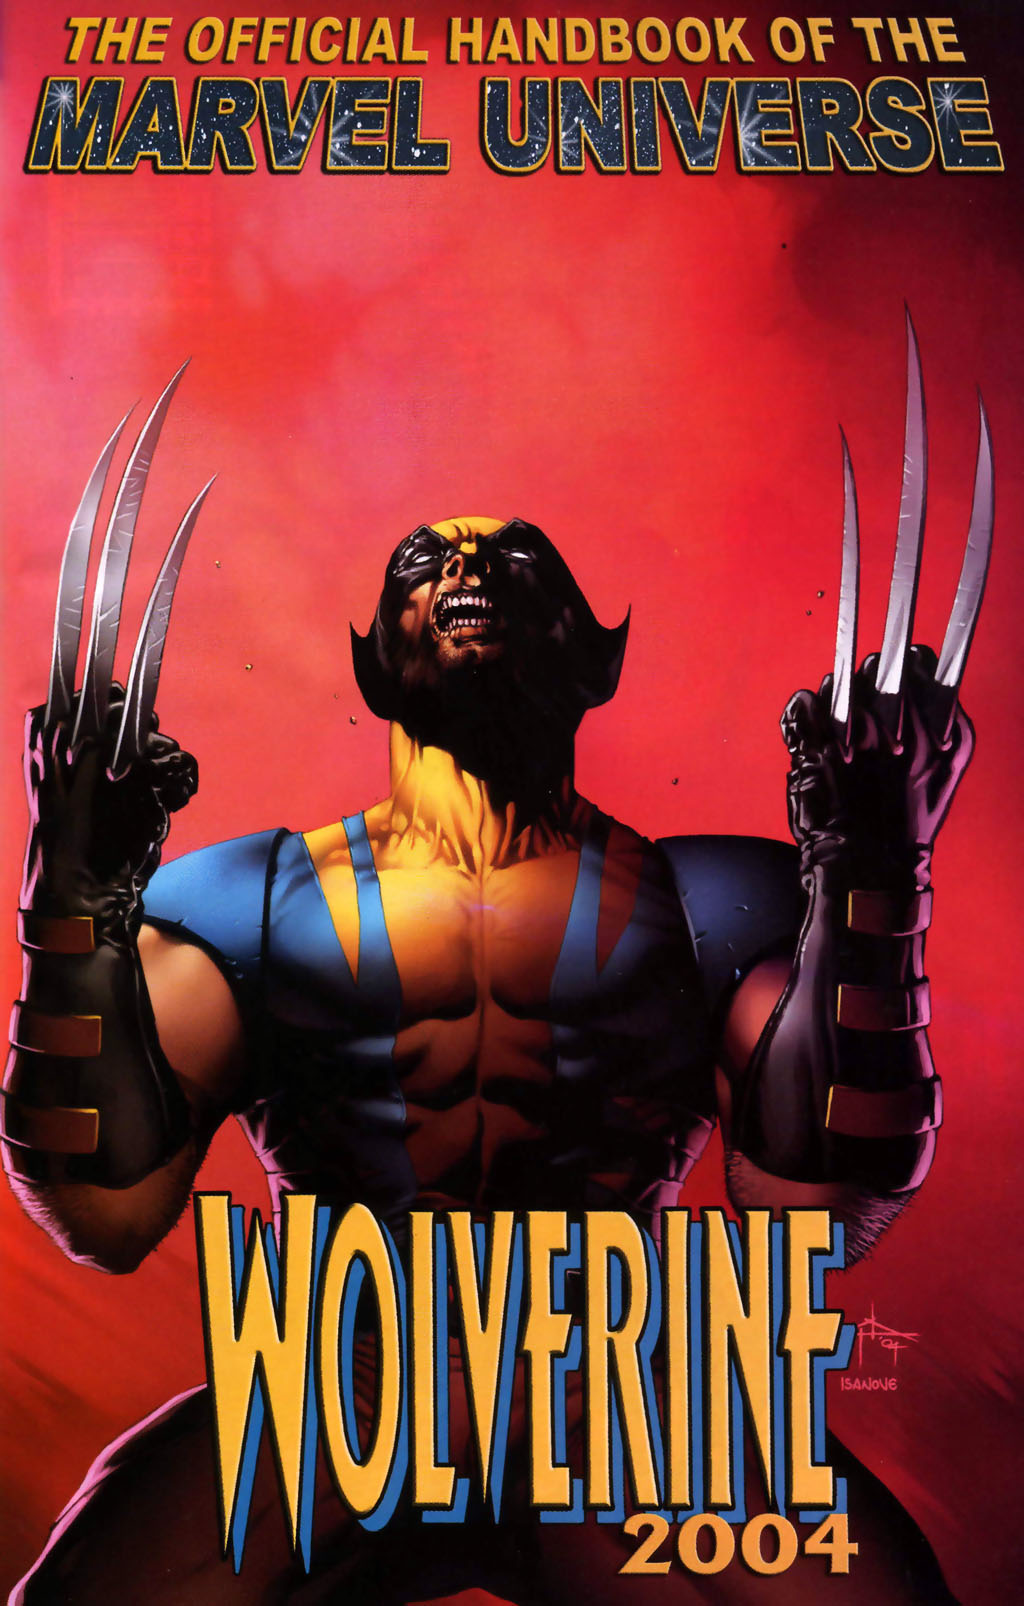 Read online Official Handbook of the Marvel Universe: Wolverine 2004 comic -  Issue # Full - 3